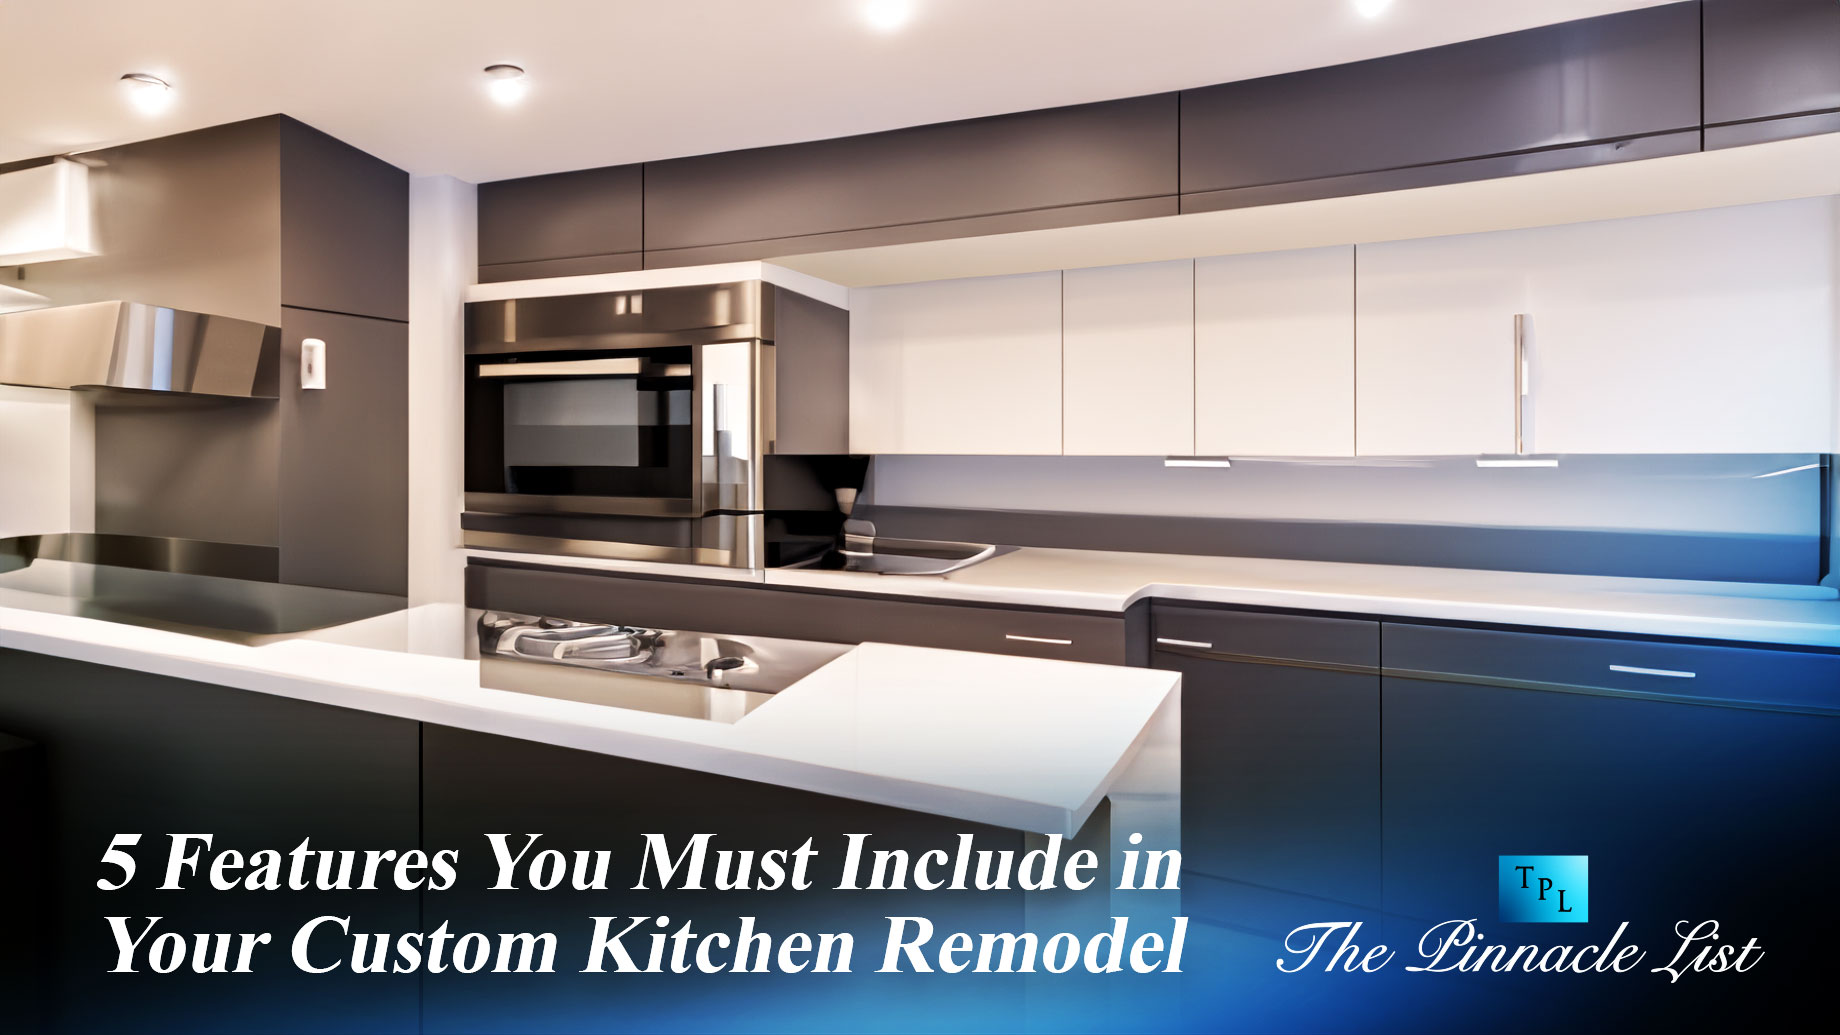 5 Features You Must Include in Your Custom Kitchen Remodel